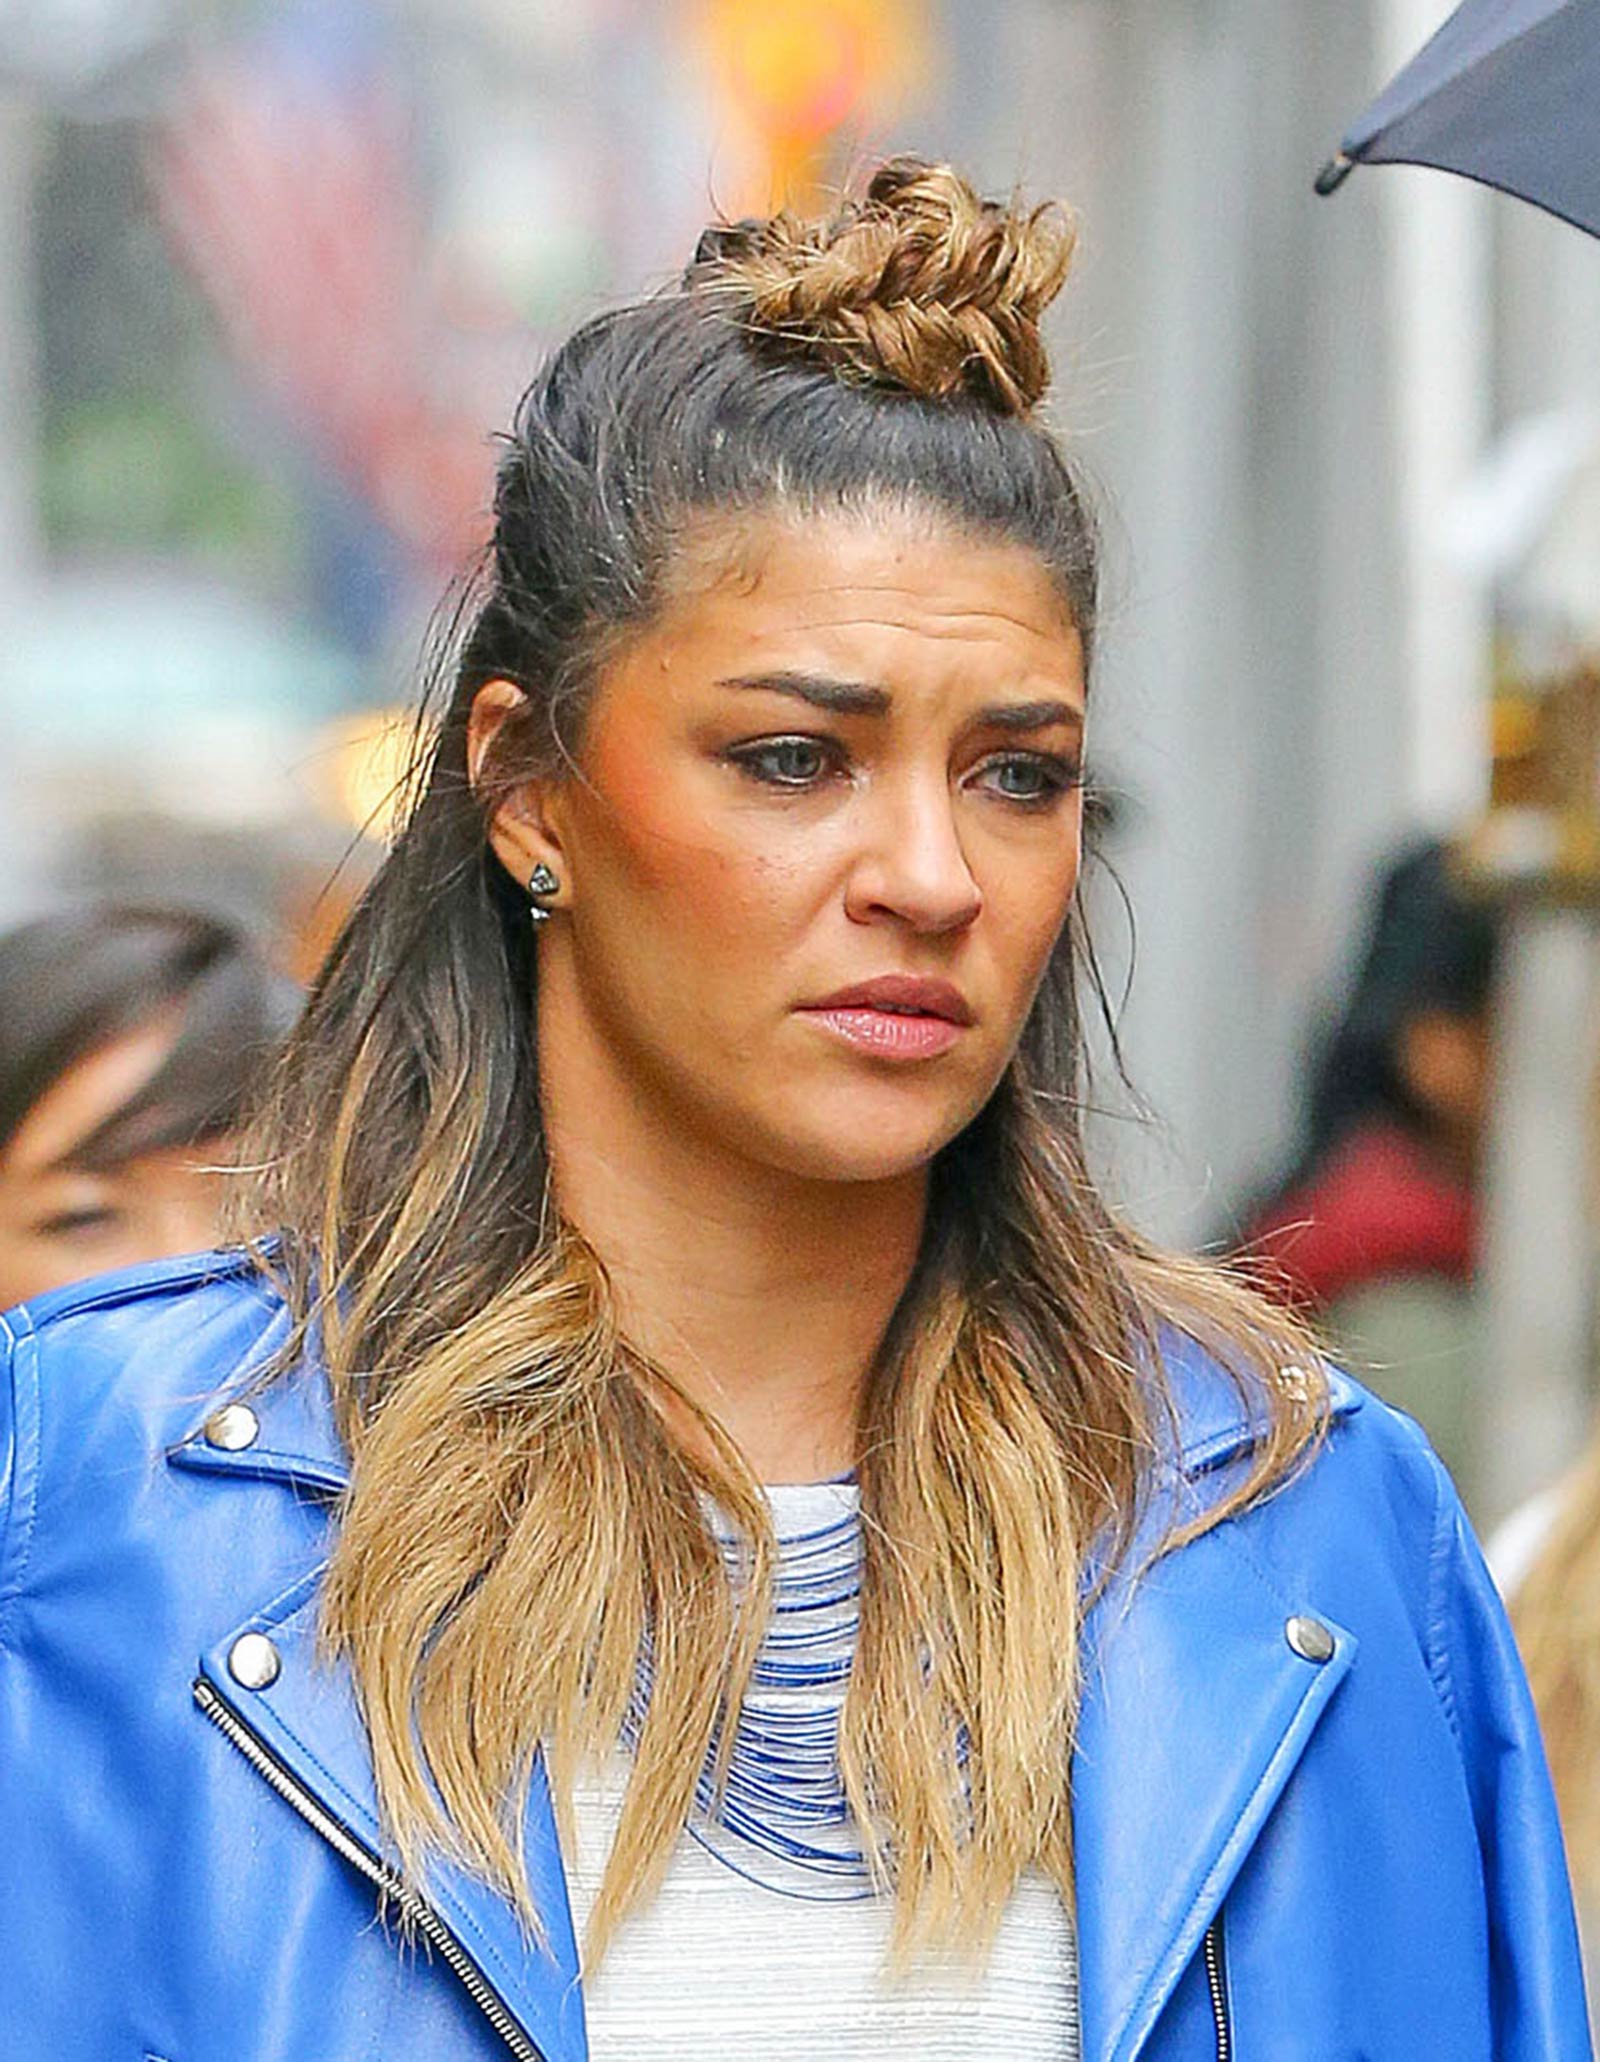 Jessica Szohr out and about in NYC